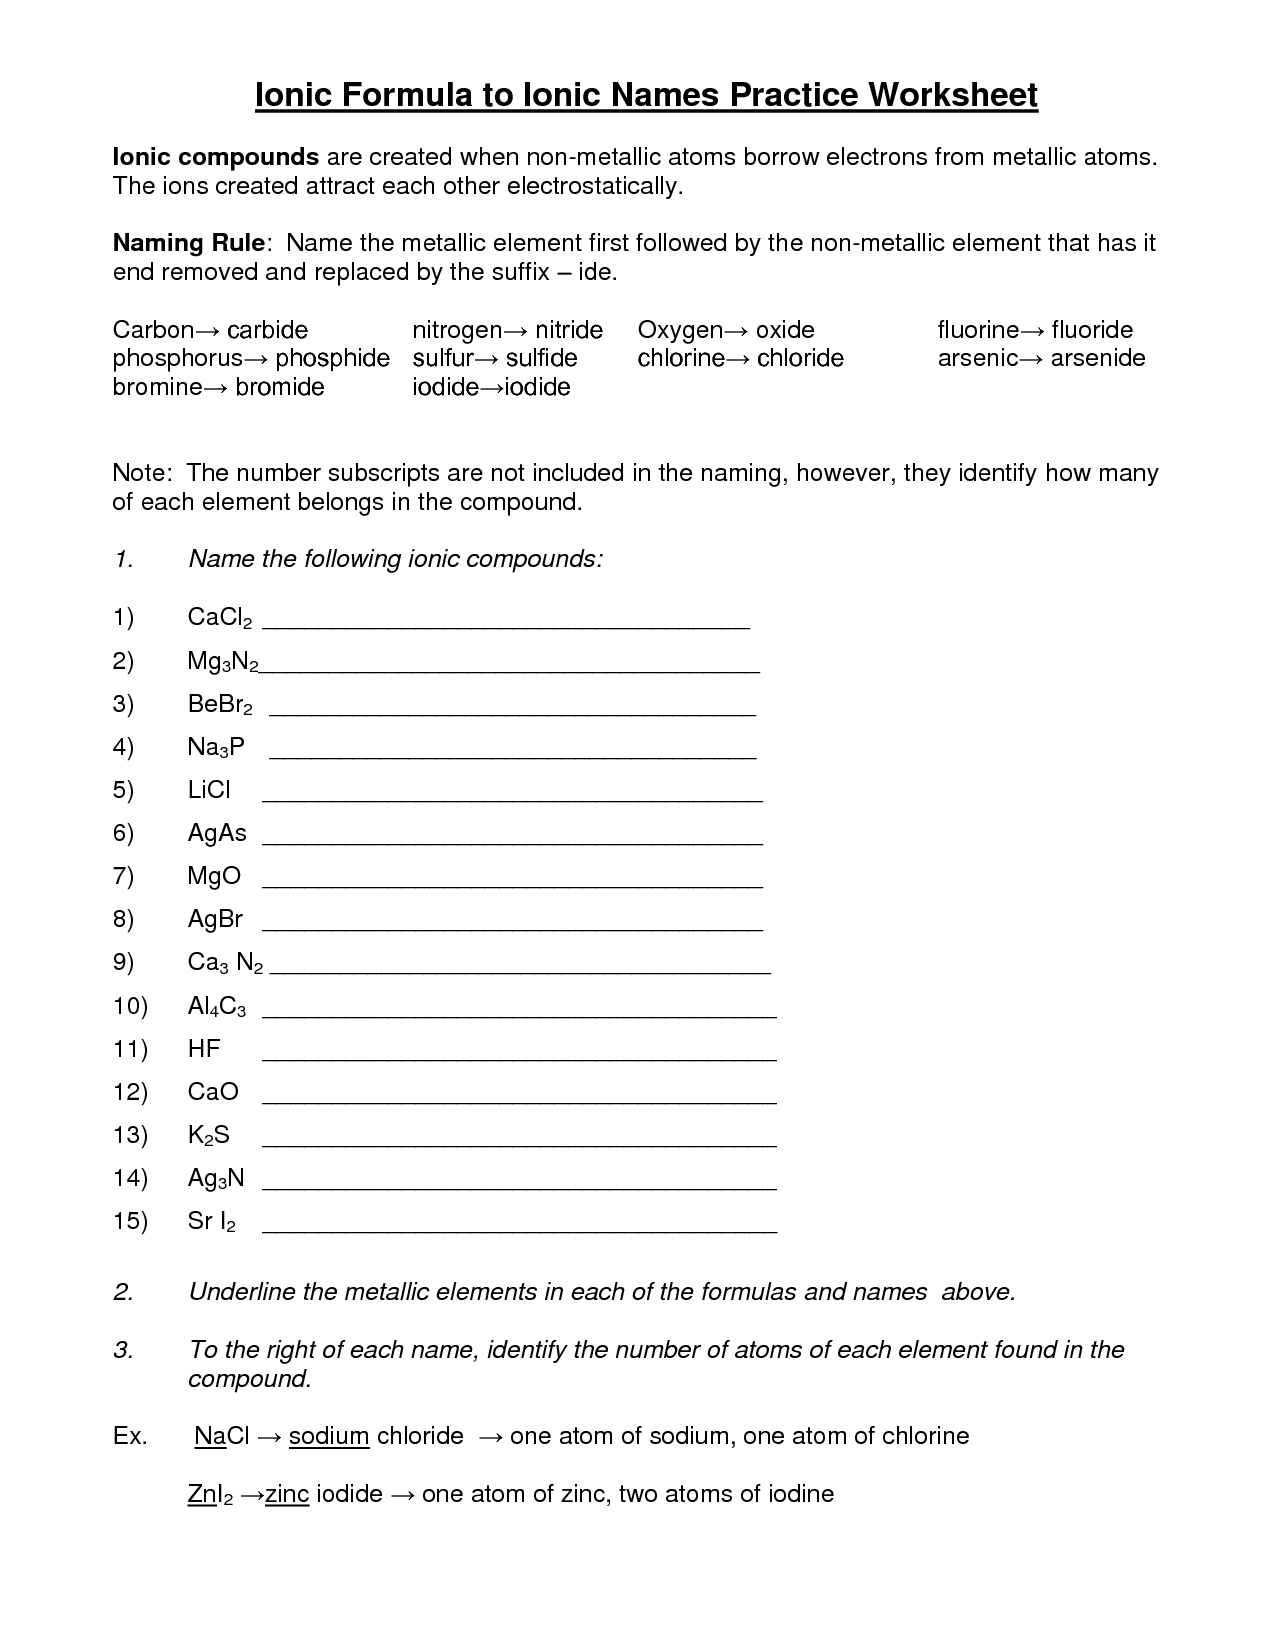 Practice Naming Ionic Compounds Worksheet